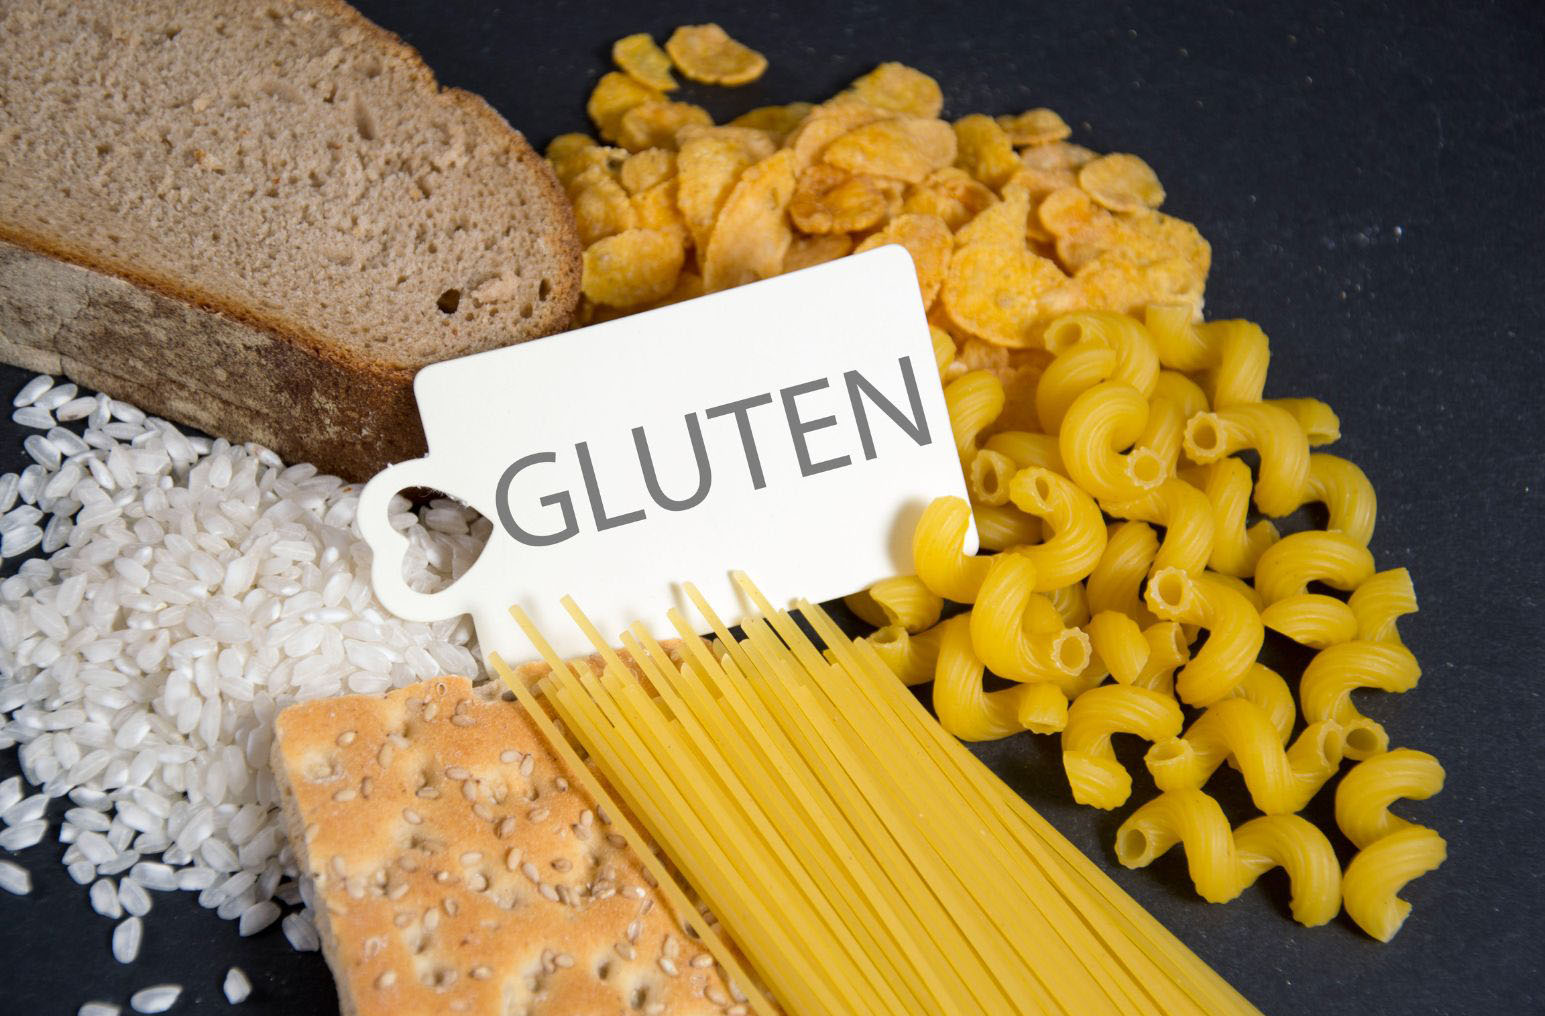 pasta, bread and crackers with gluten sign